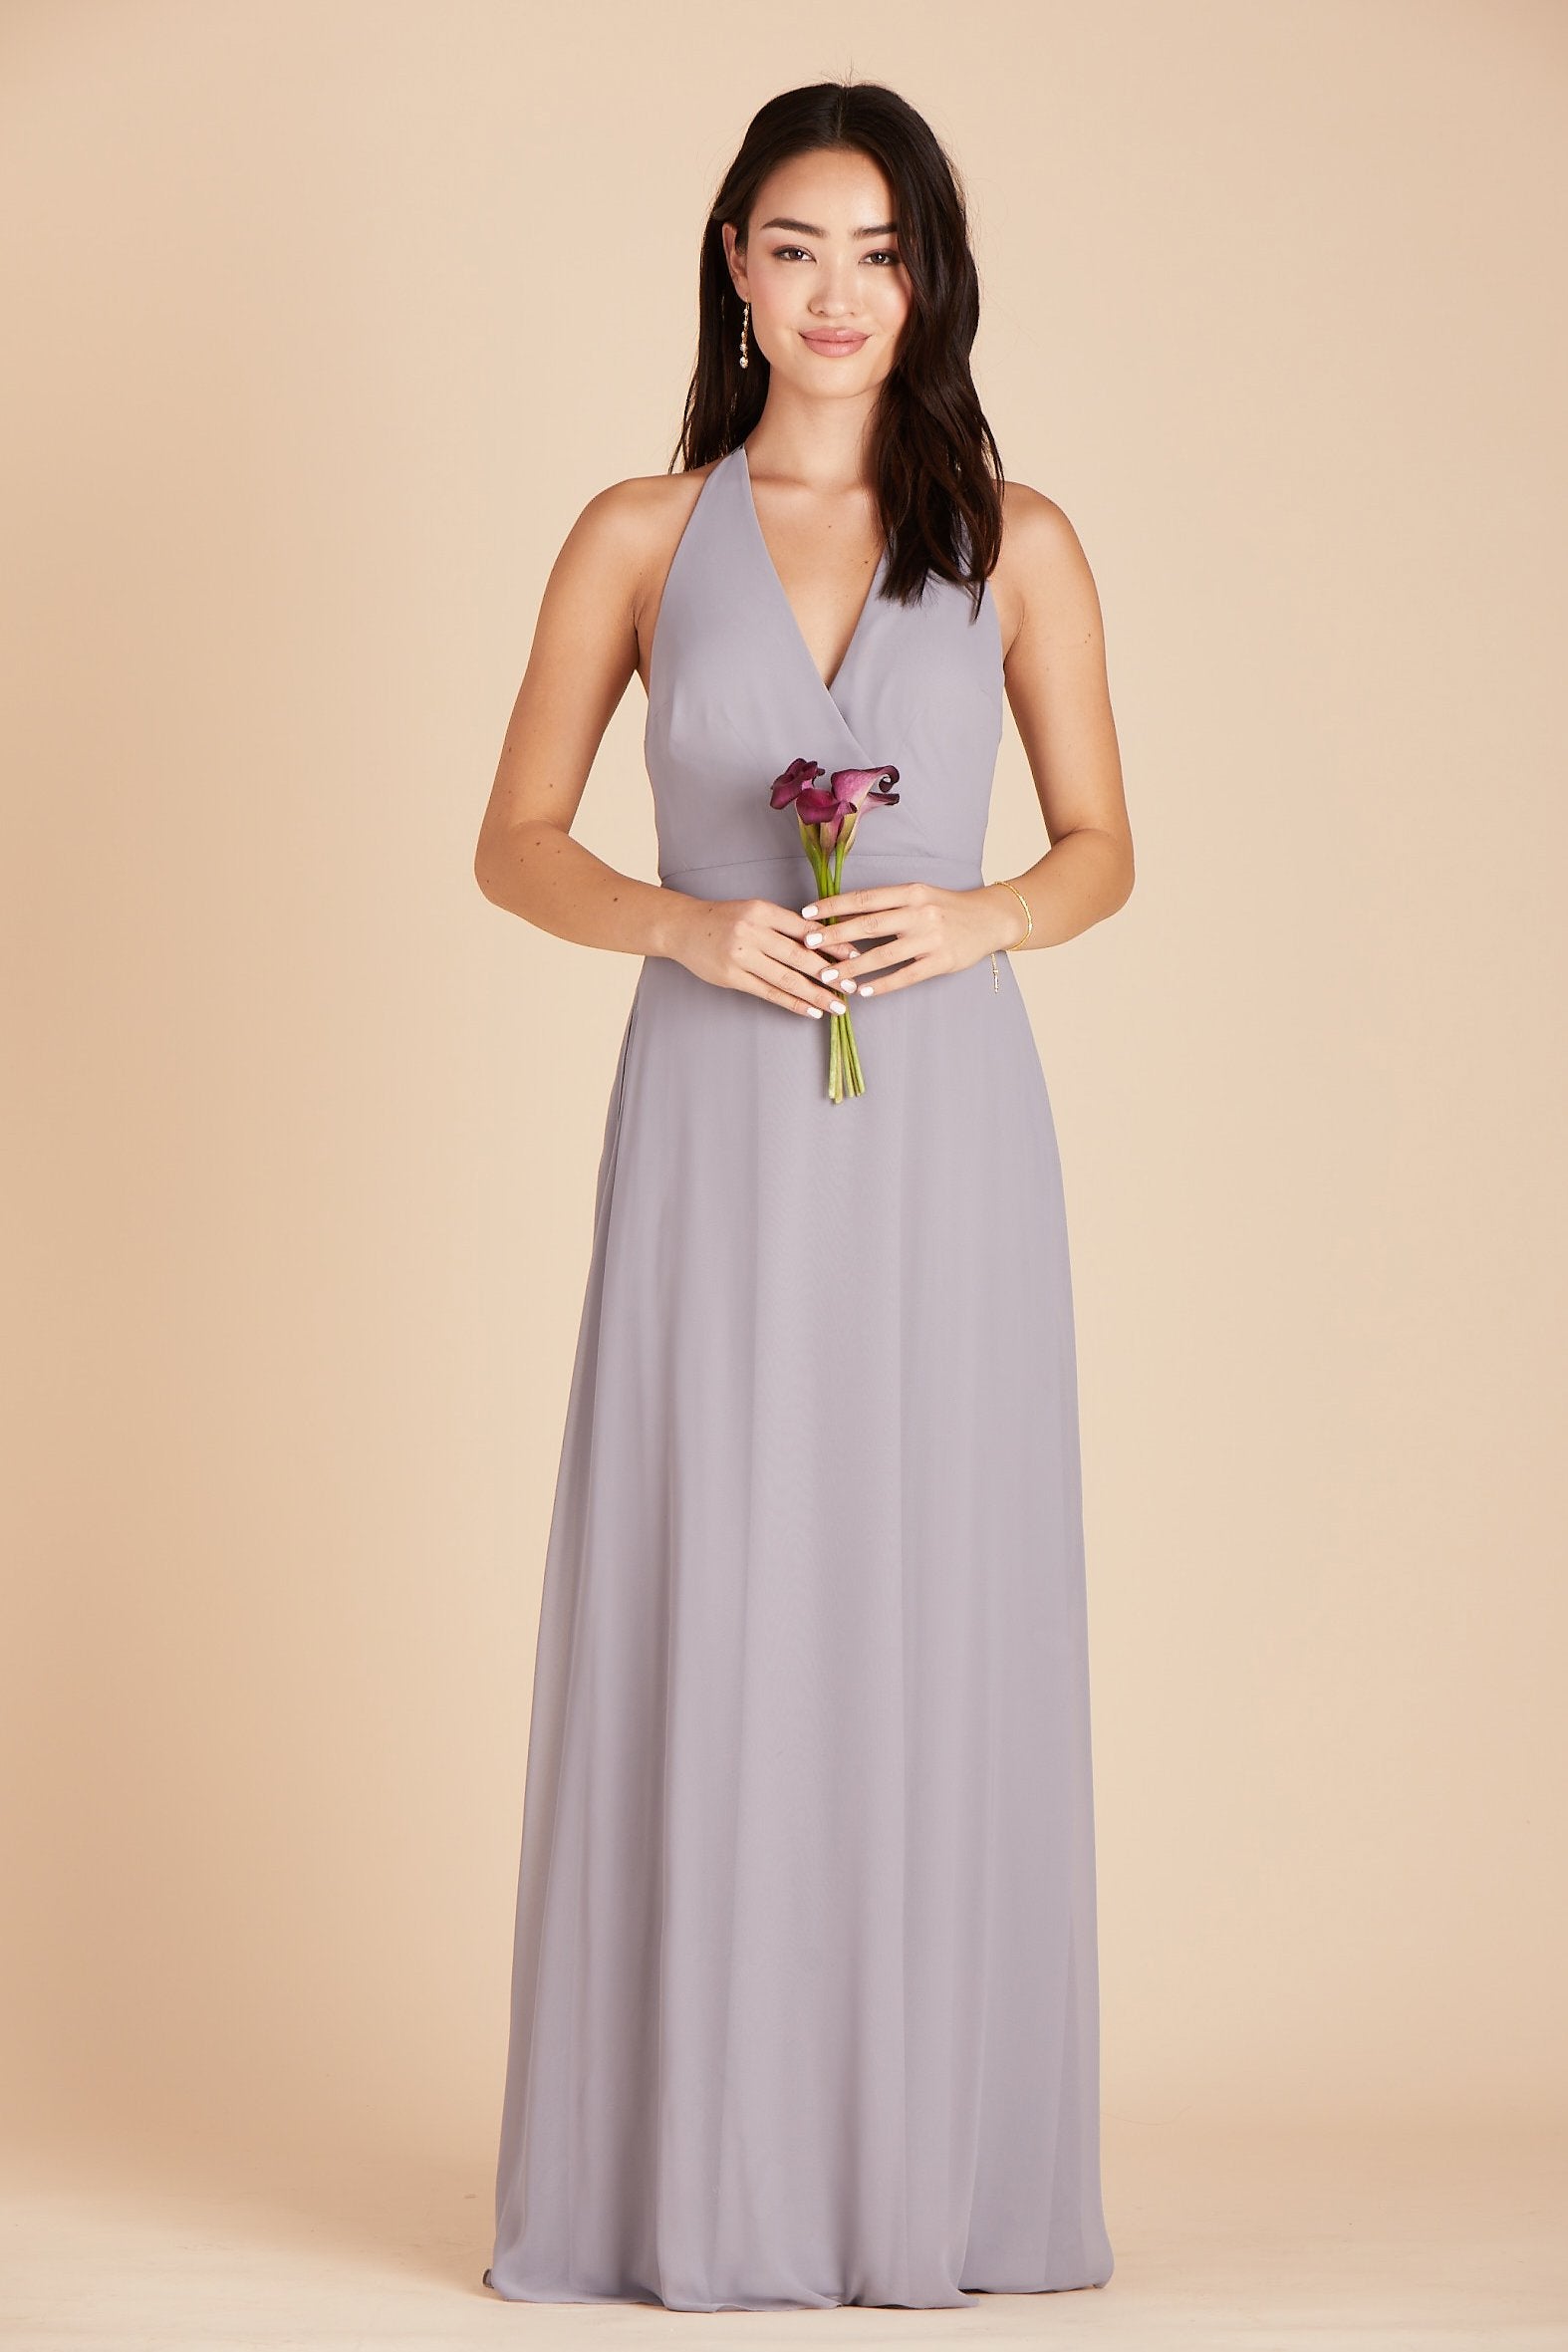 Moni convertible bridesmaids dress in silver chiffon by Birdy Grey, front view